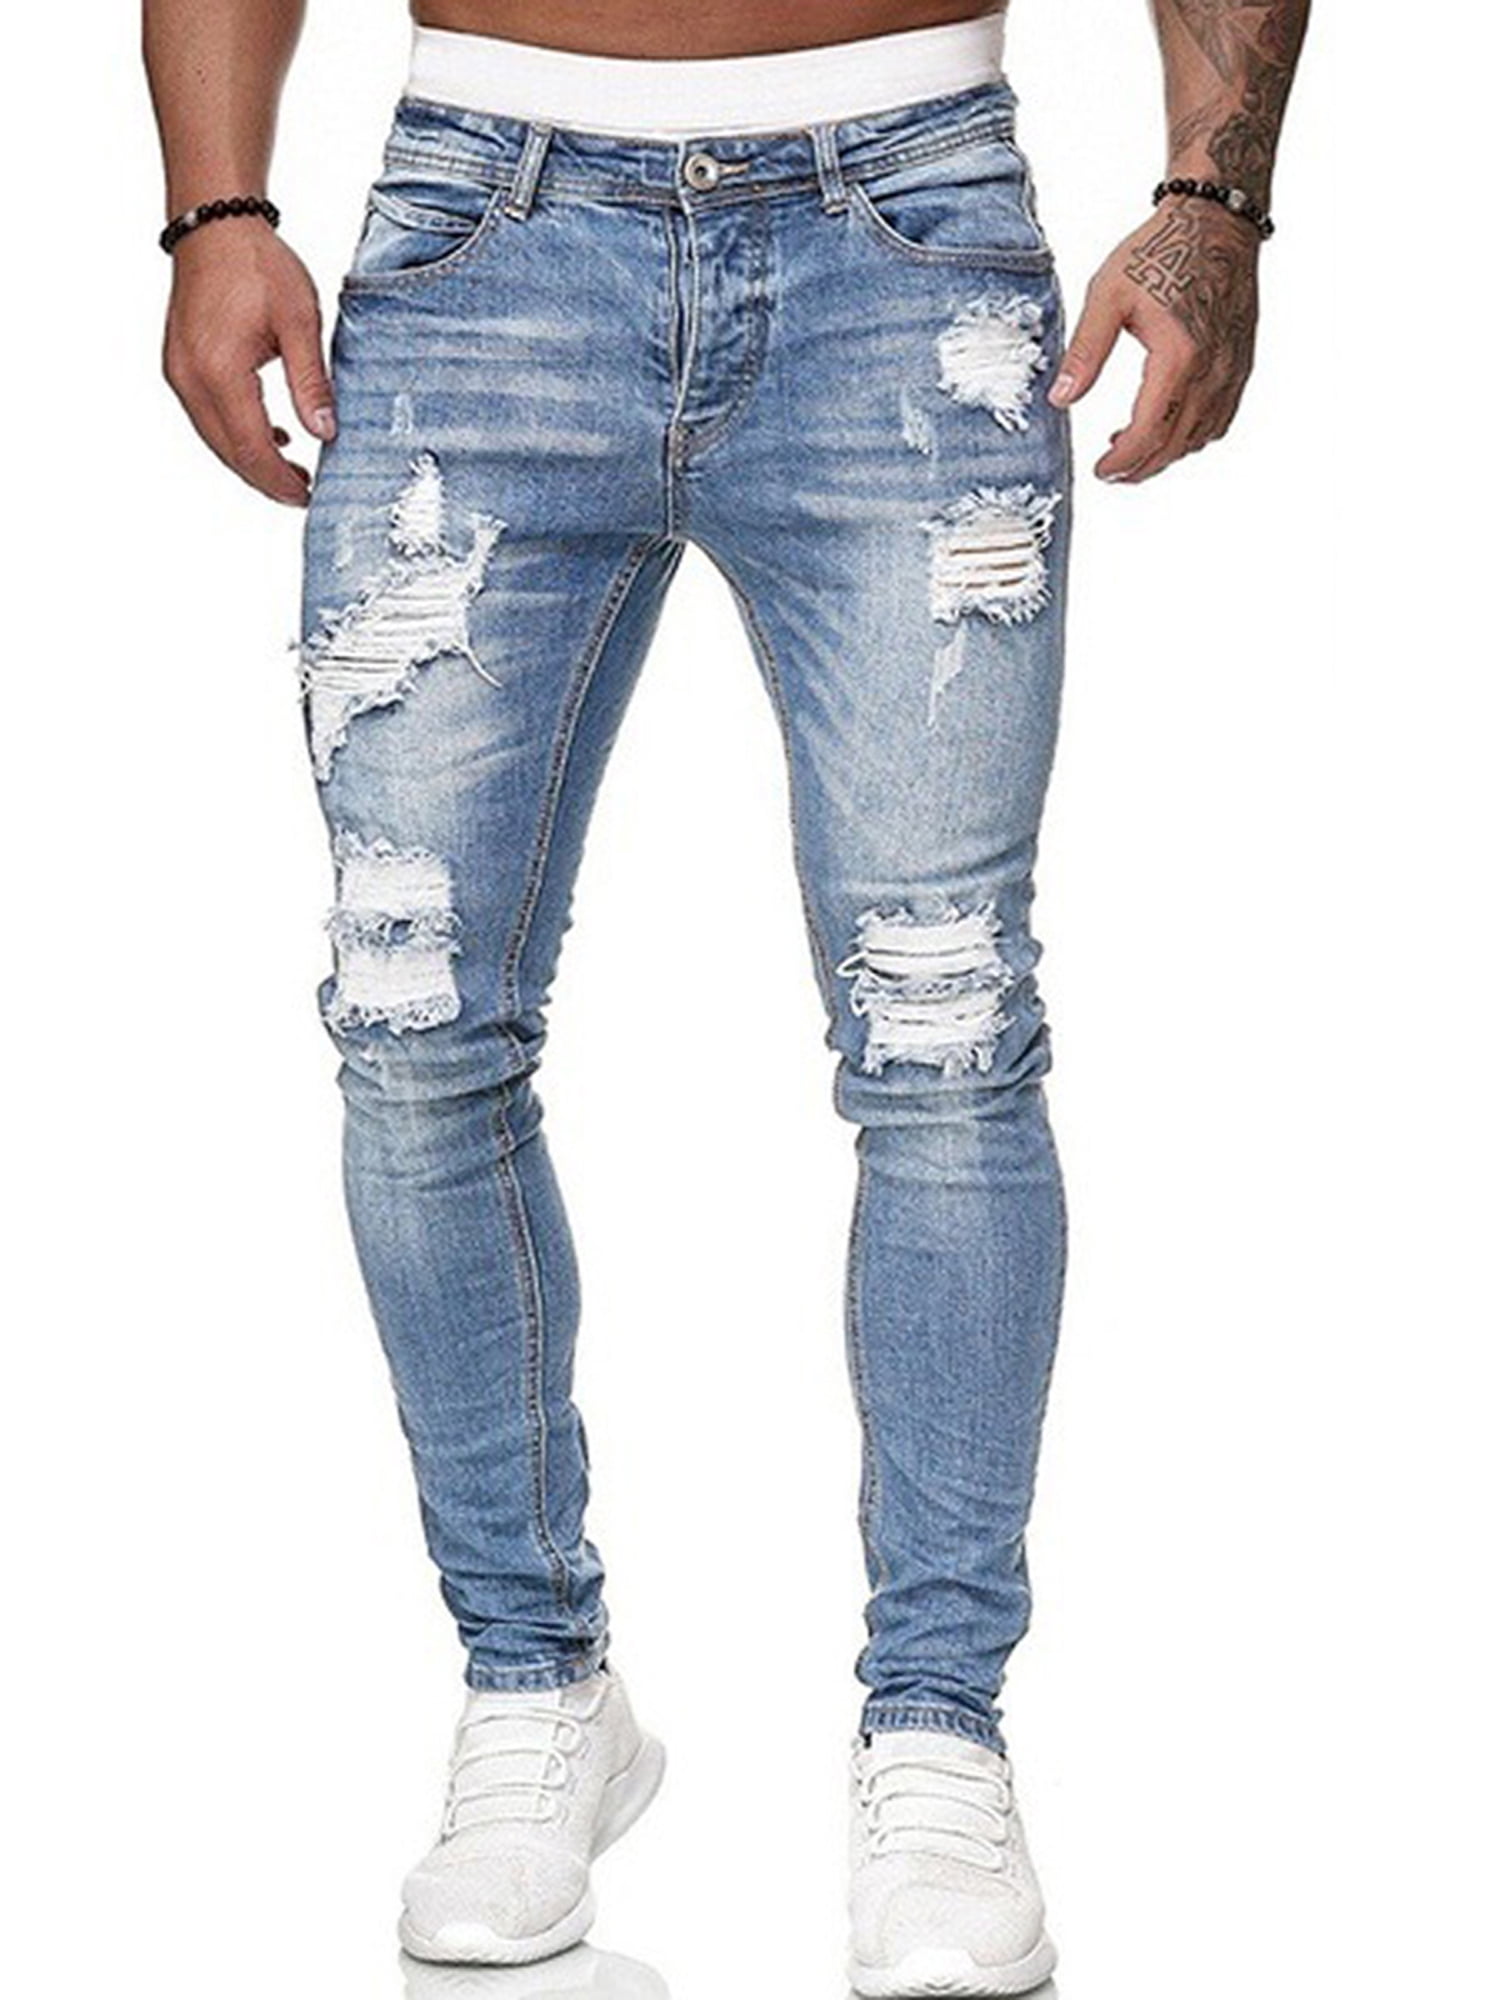 Diconna Men's Stretch Skinny Ripped Jeans Super Comfy Distressed Denim  Pants With Destroyed Holes Light Blue M